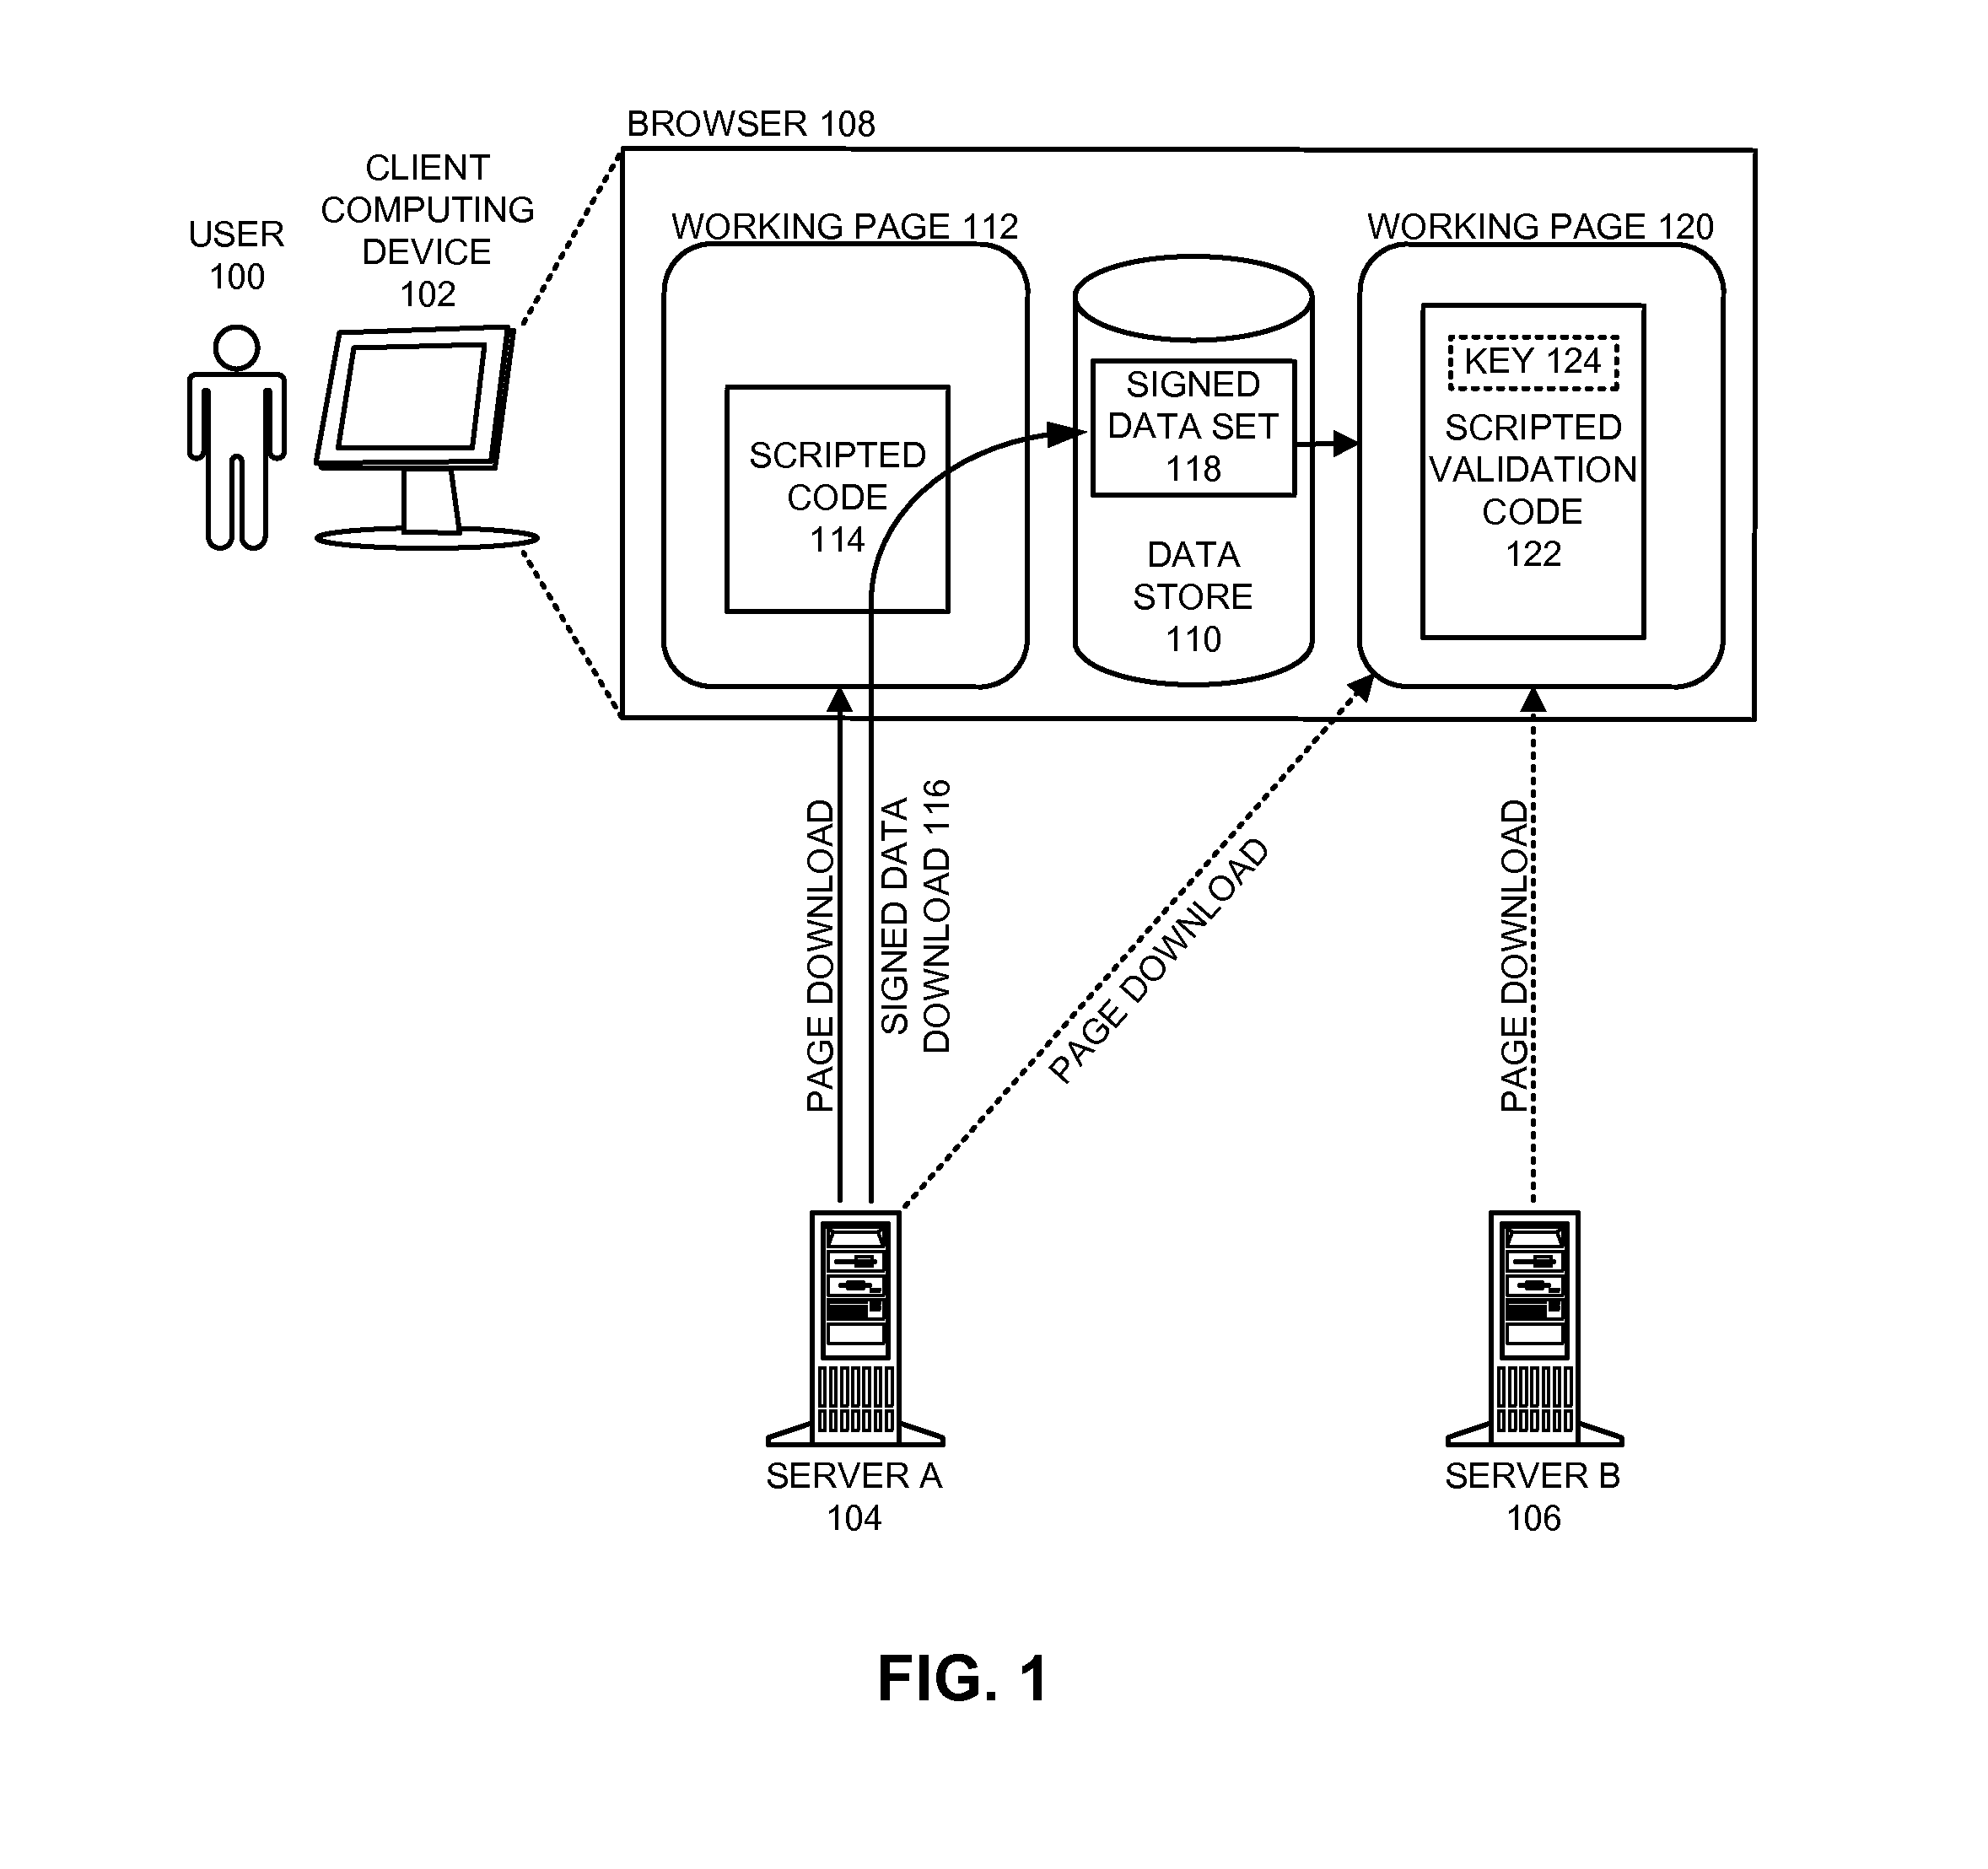 Method and apparatus for ensuring the integrity of a downloaded data set